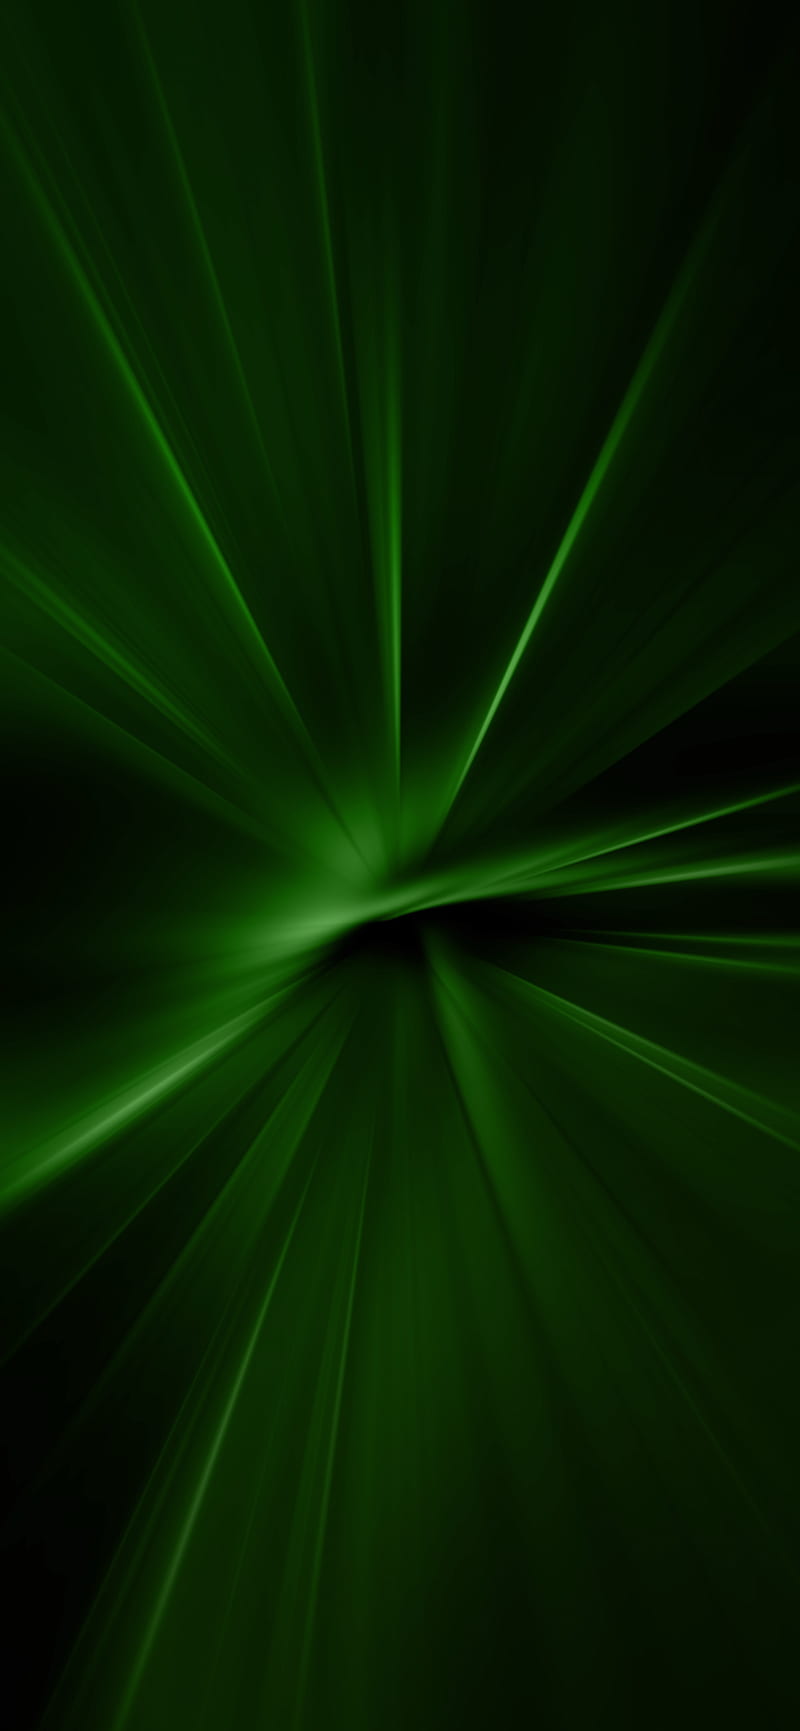 Download] Samsung Galaxy S22 Series Wallpapers at high resolution -  ANDROIDLEO